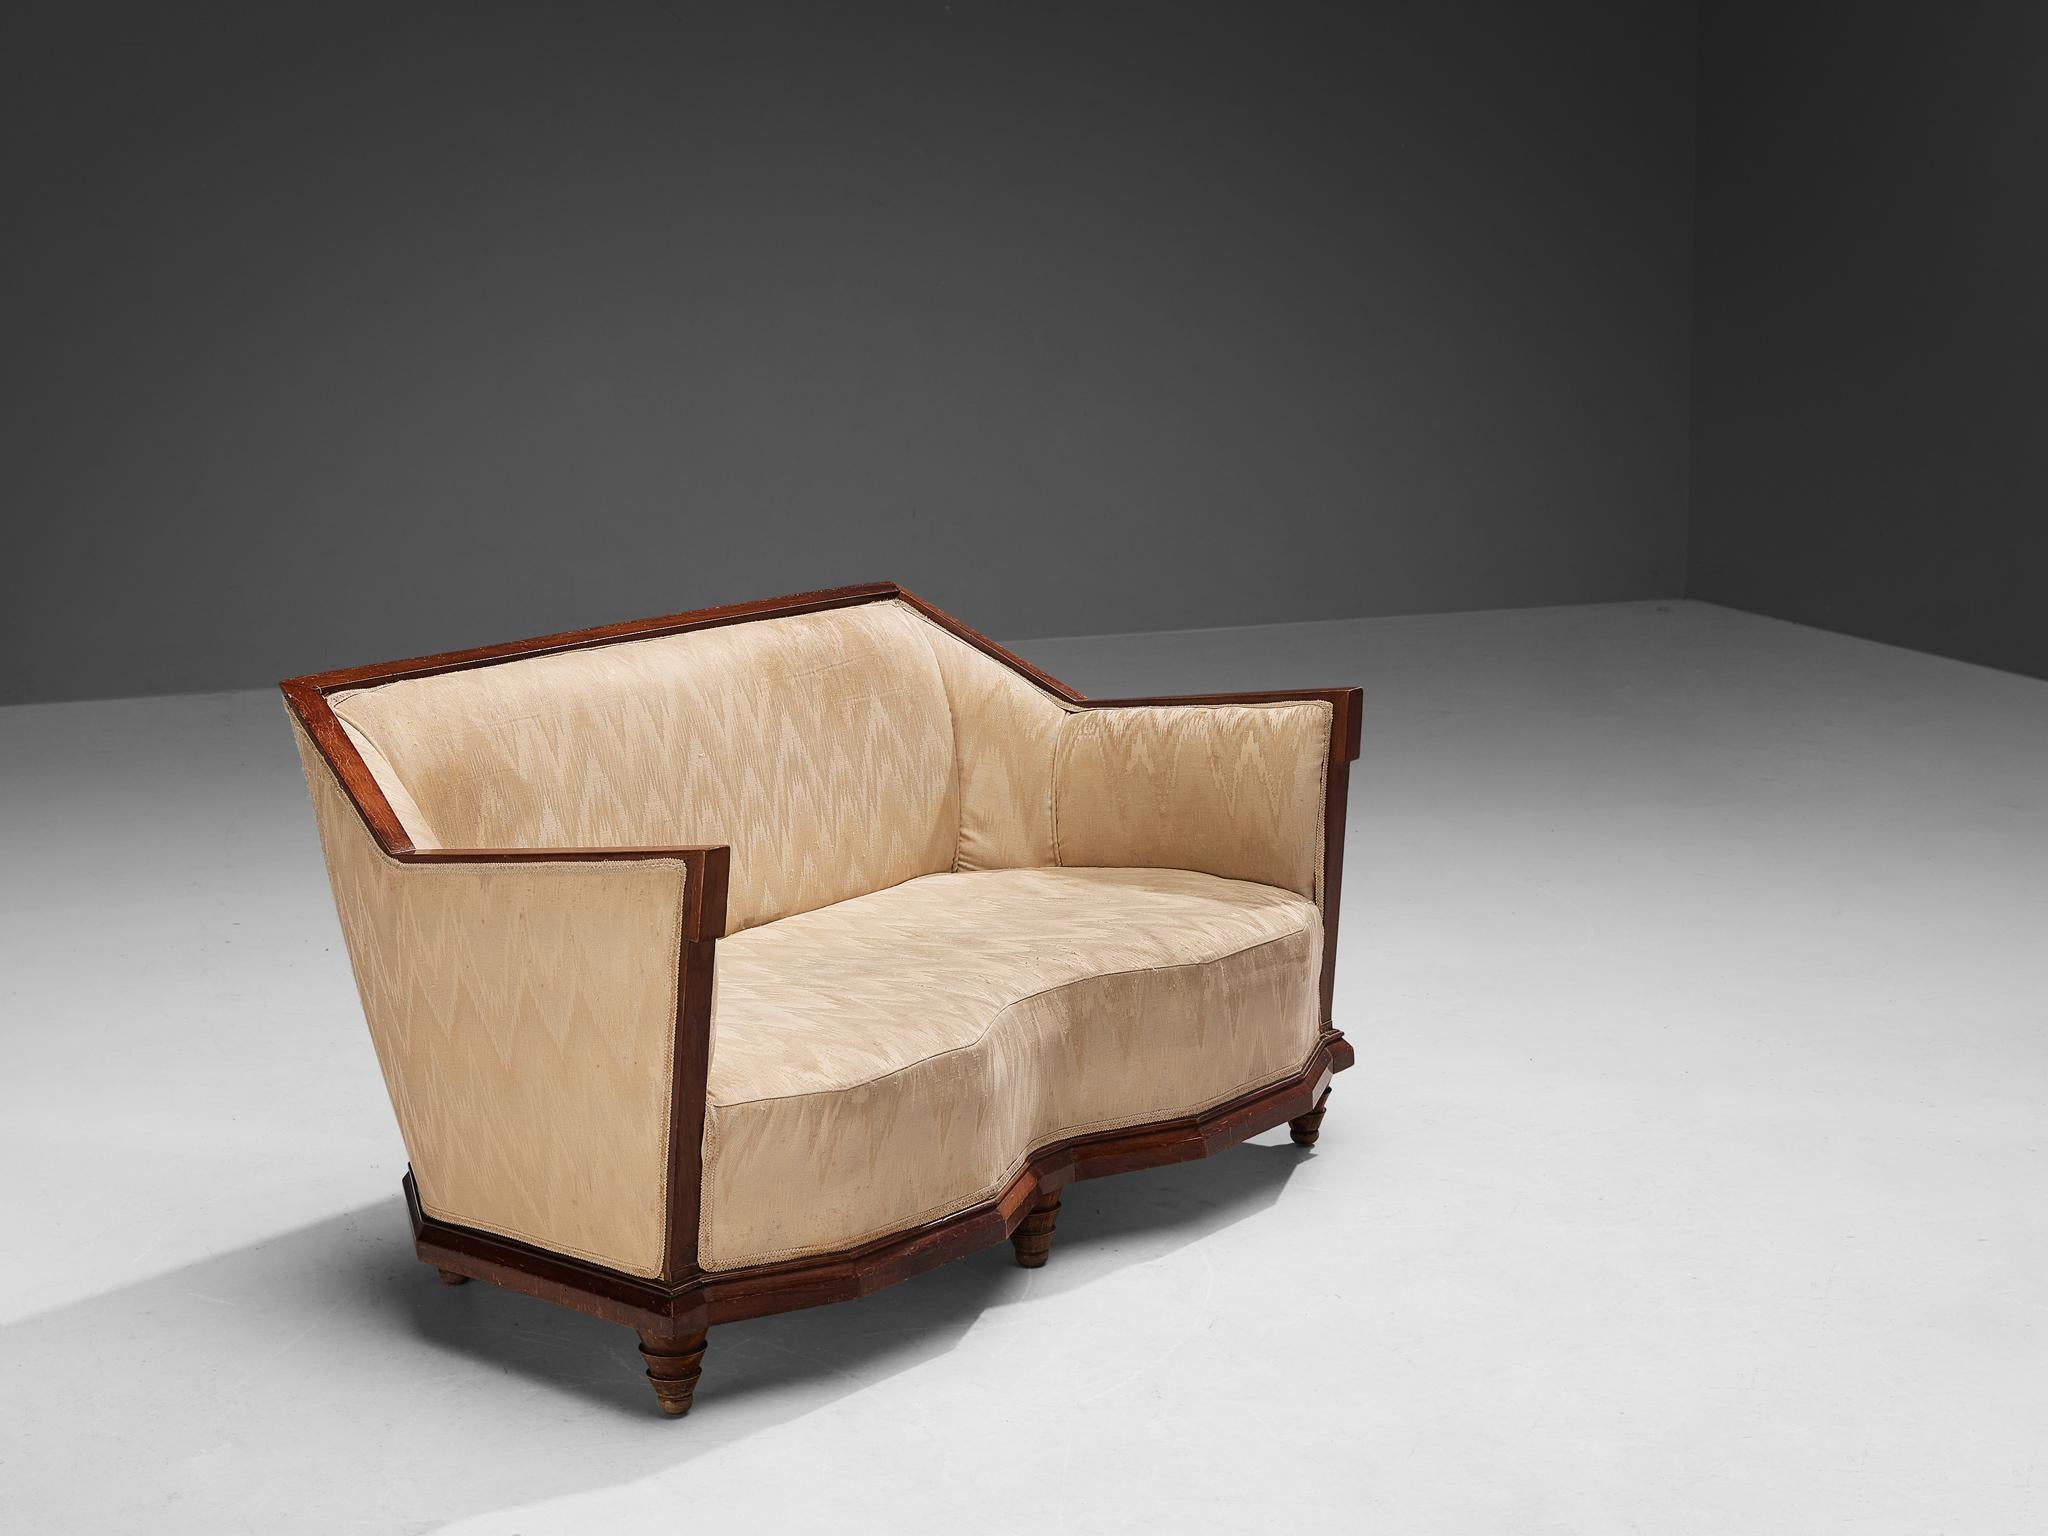 Sofa, walnut, fabric, Italy, 1930s/1940s

A magnificent and strong angular sofa in walnut wood. Upholstered in a cream silk fabric in a subtle triangular pattern, a typical choice for furniture that was made in the Art Deco period. 

Please note